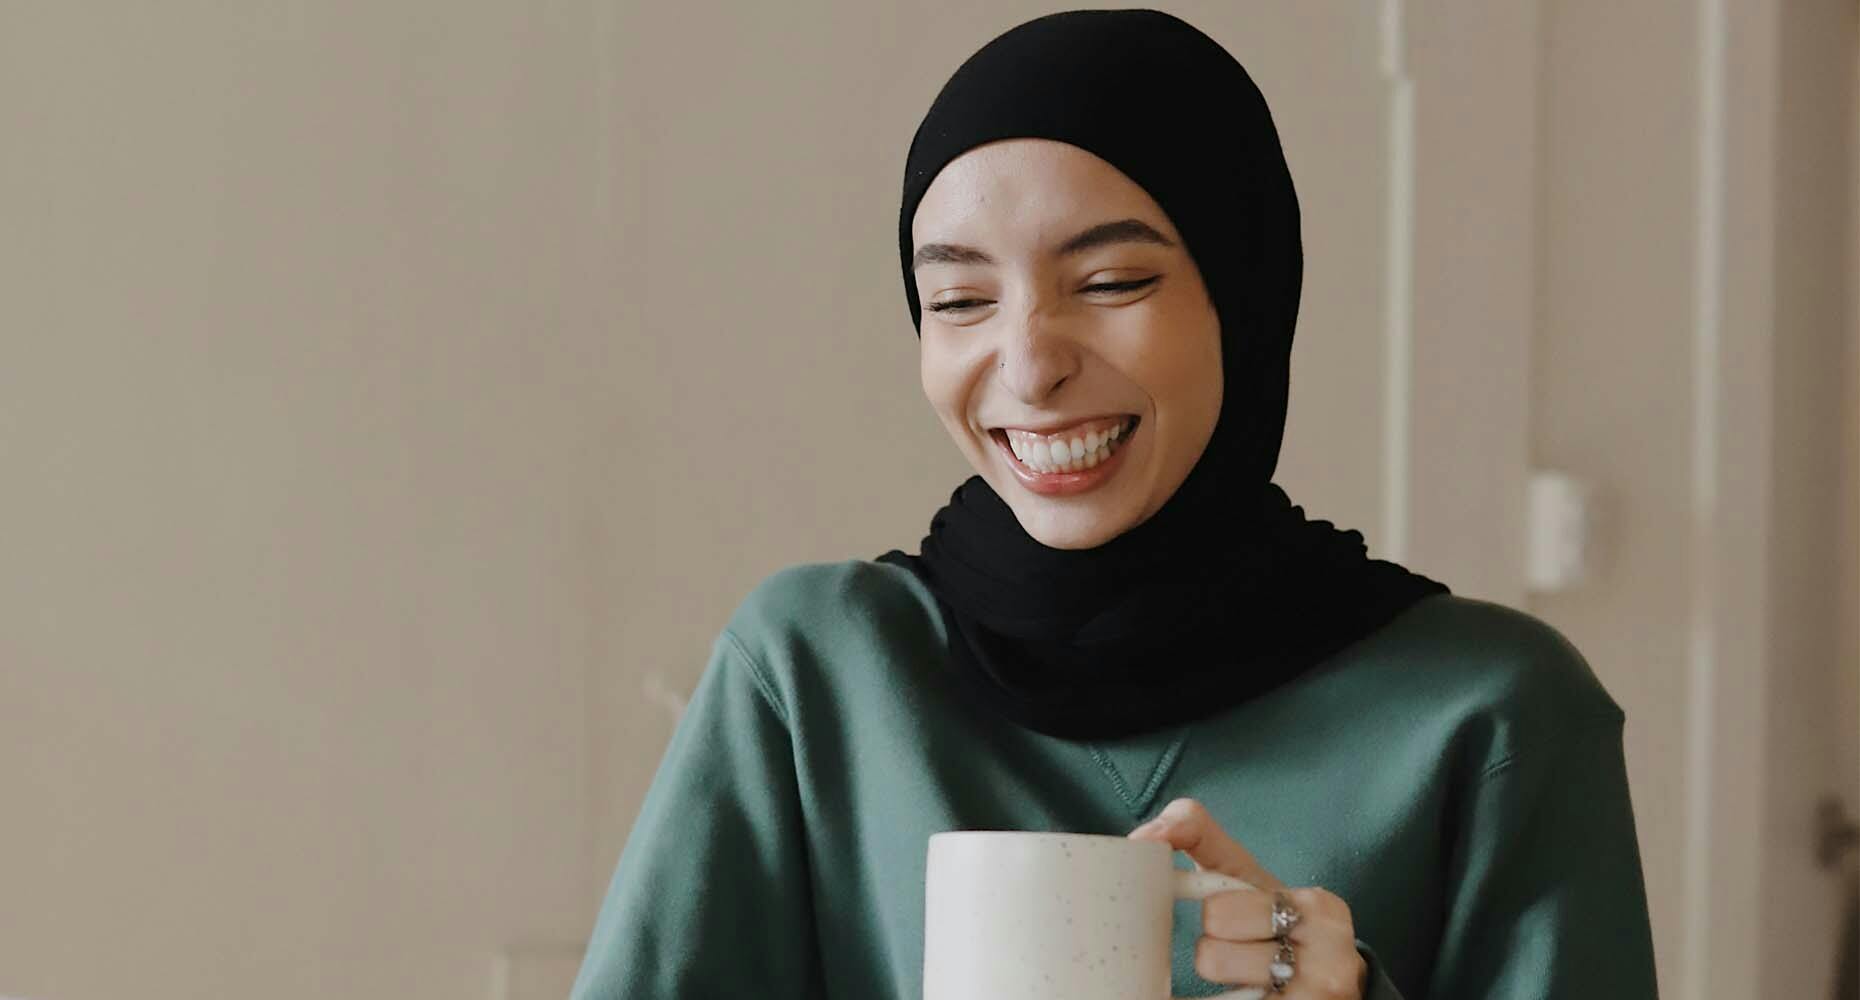 A woman wearing a headscarf enjoying a cup of coffee and laughing.